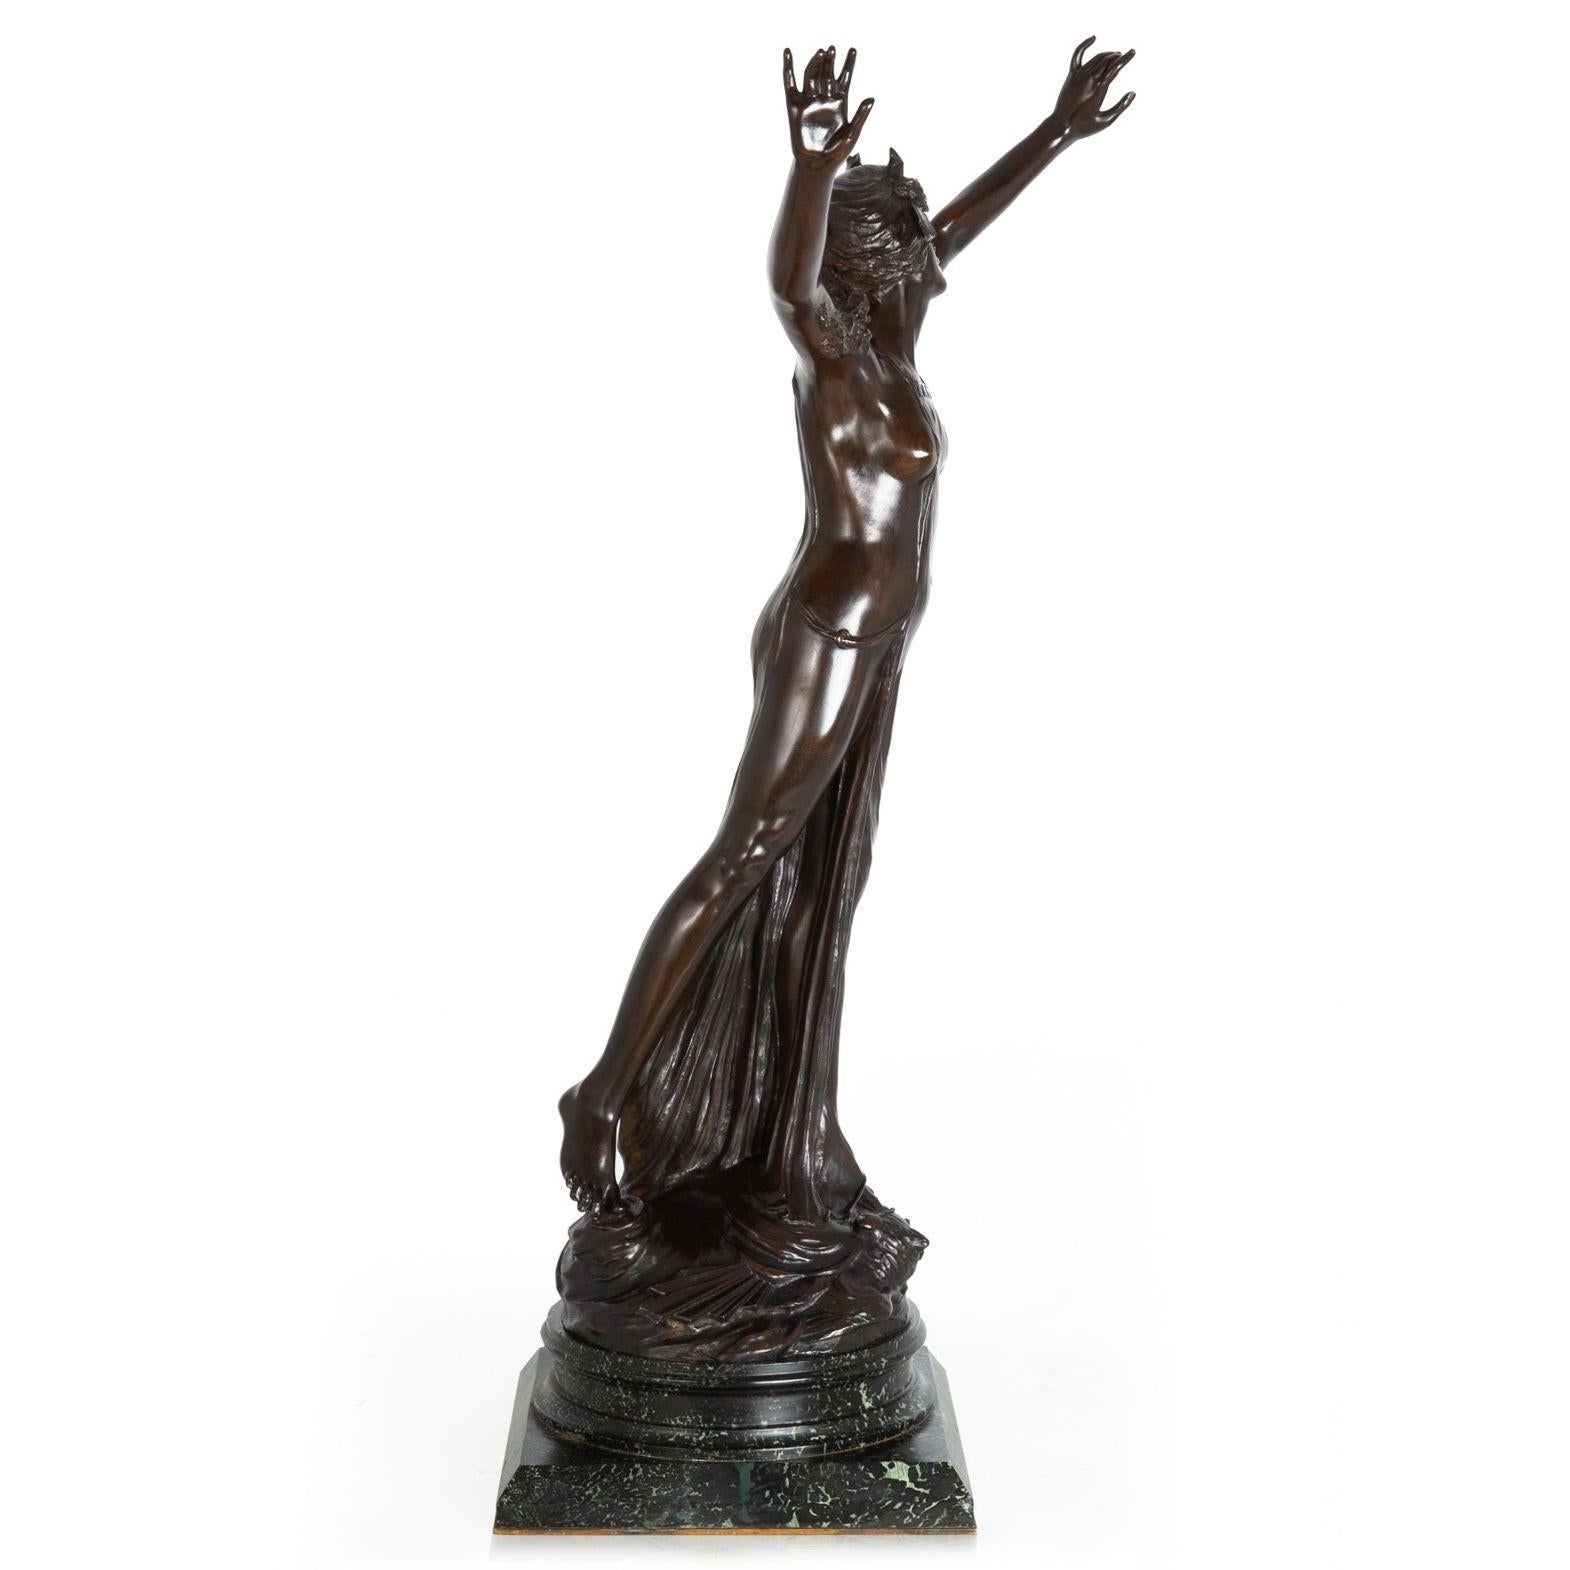 Rare Art Nouveau French Bronze Sculpture “Ariadne” by Georges Flamand 1